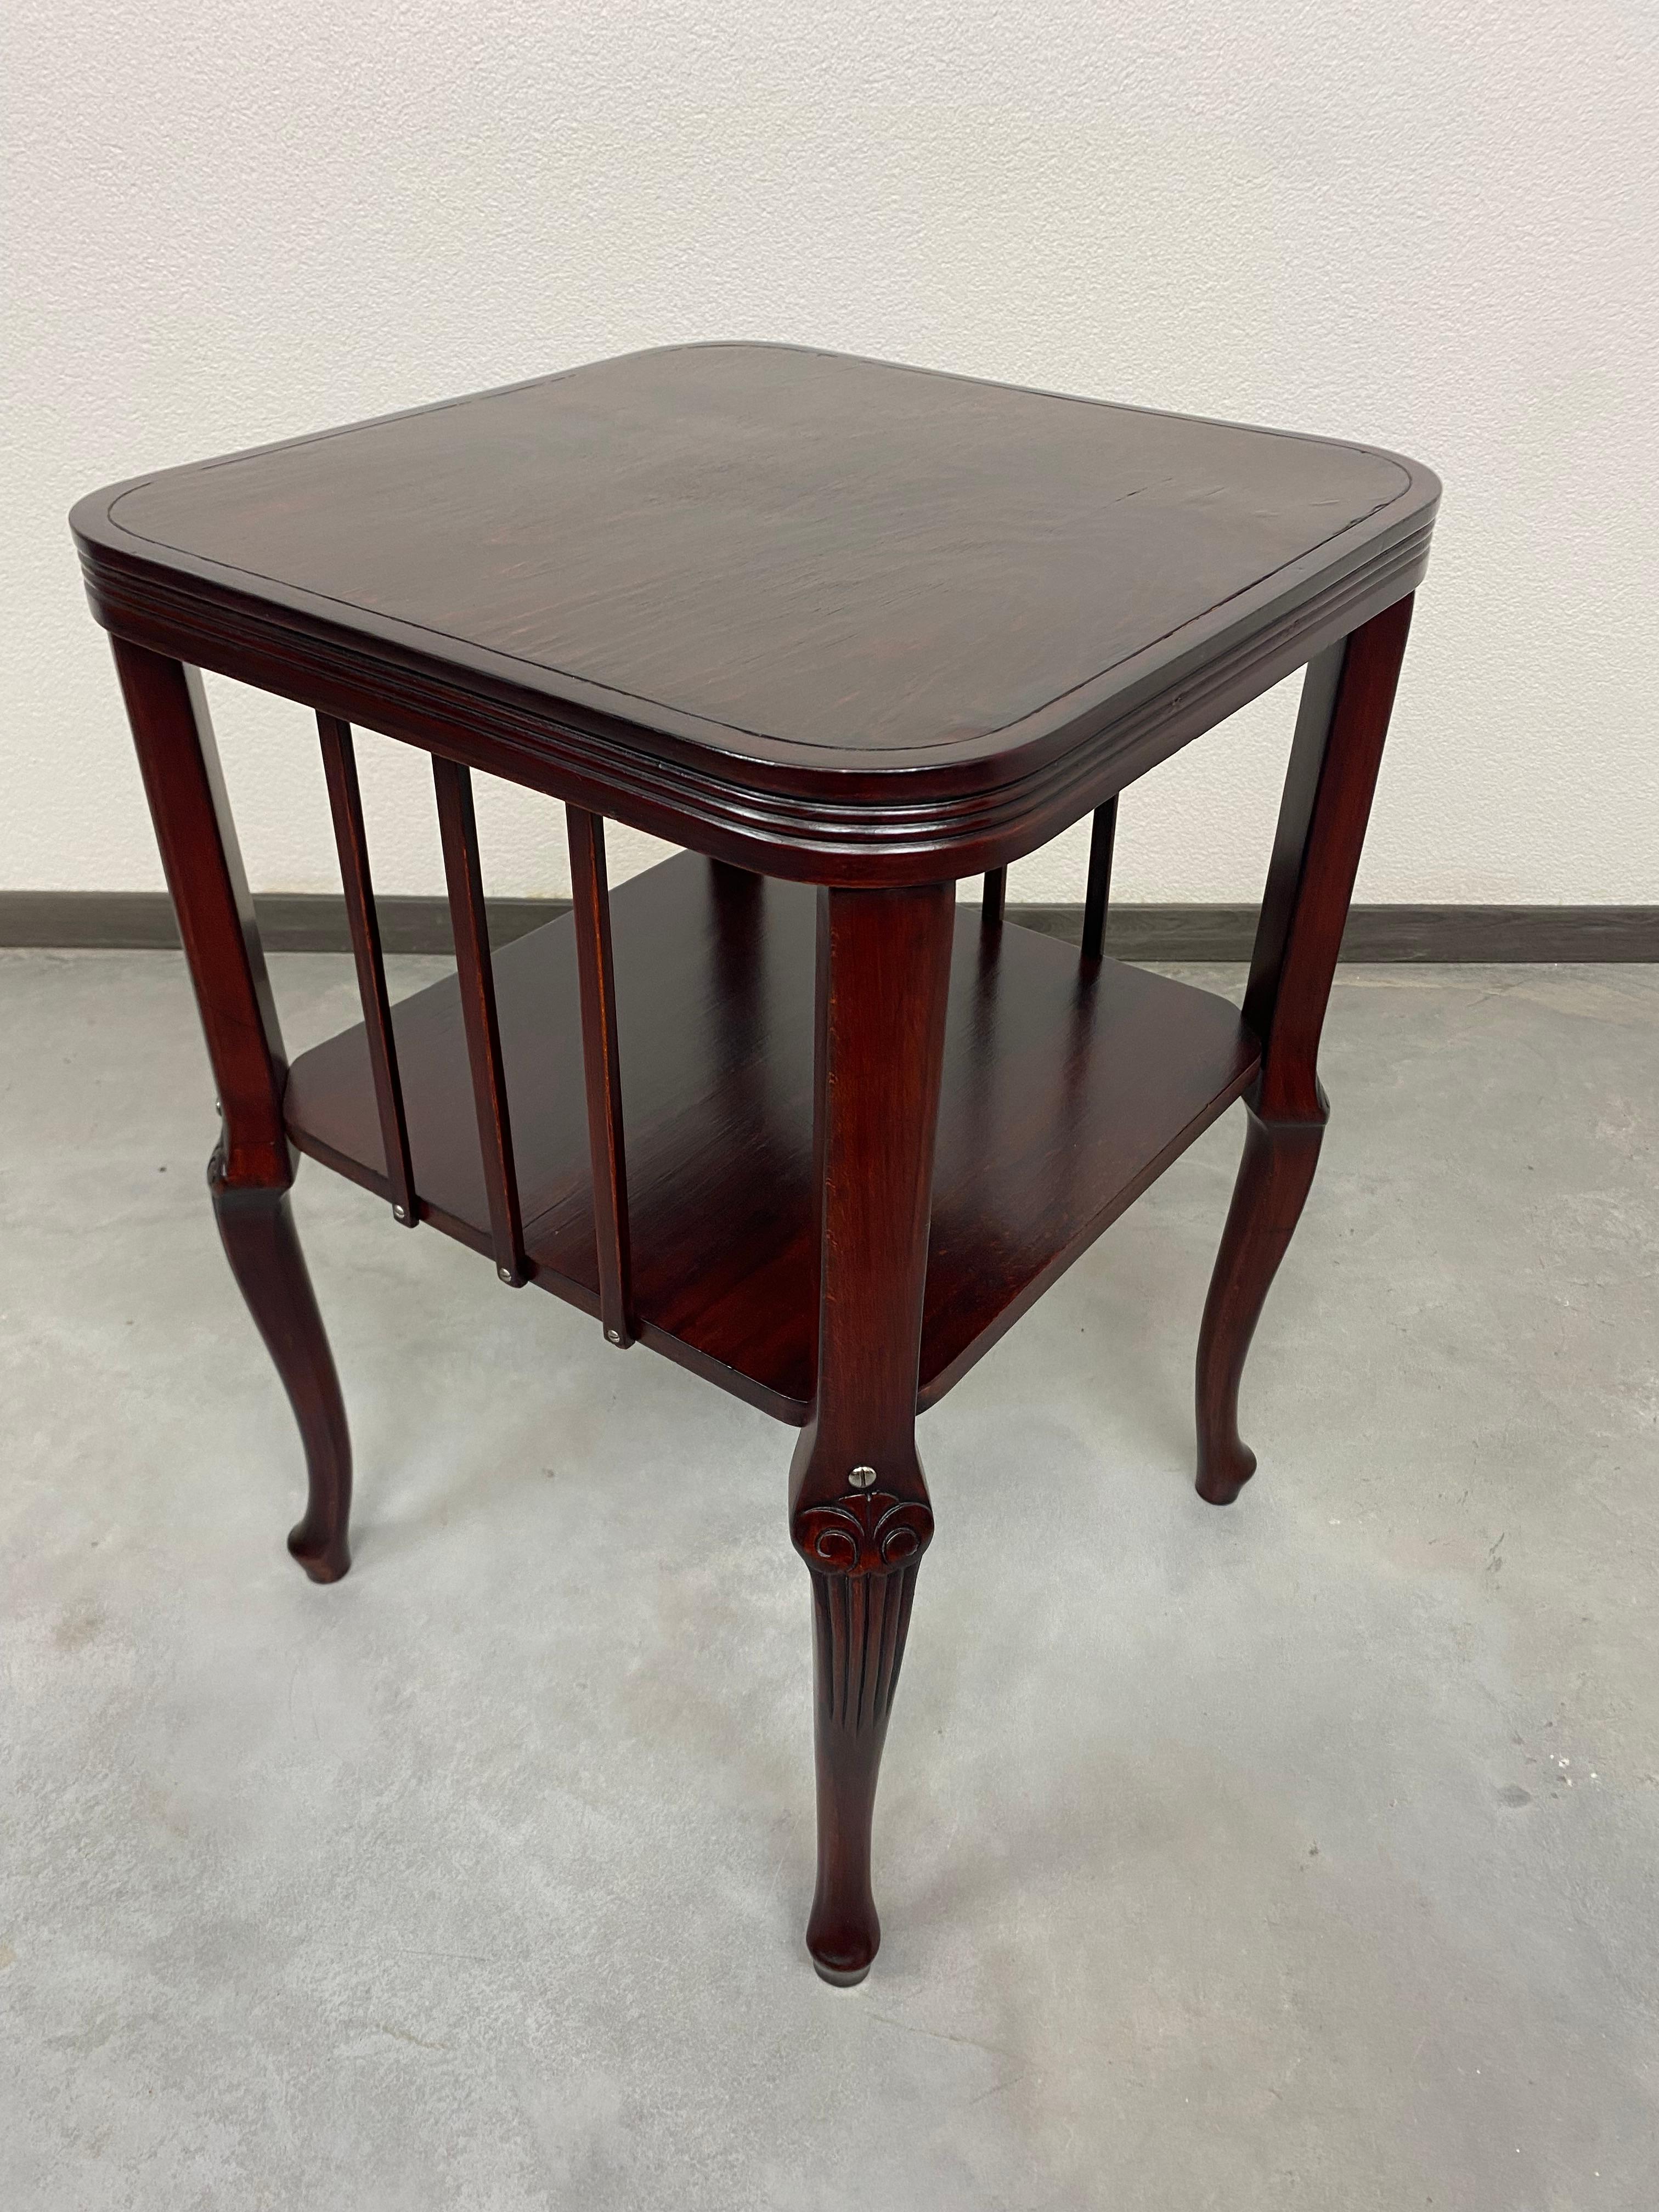 Secession site table no.412 by Otto Wagner for Thonet. Professionally stained and repolished.